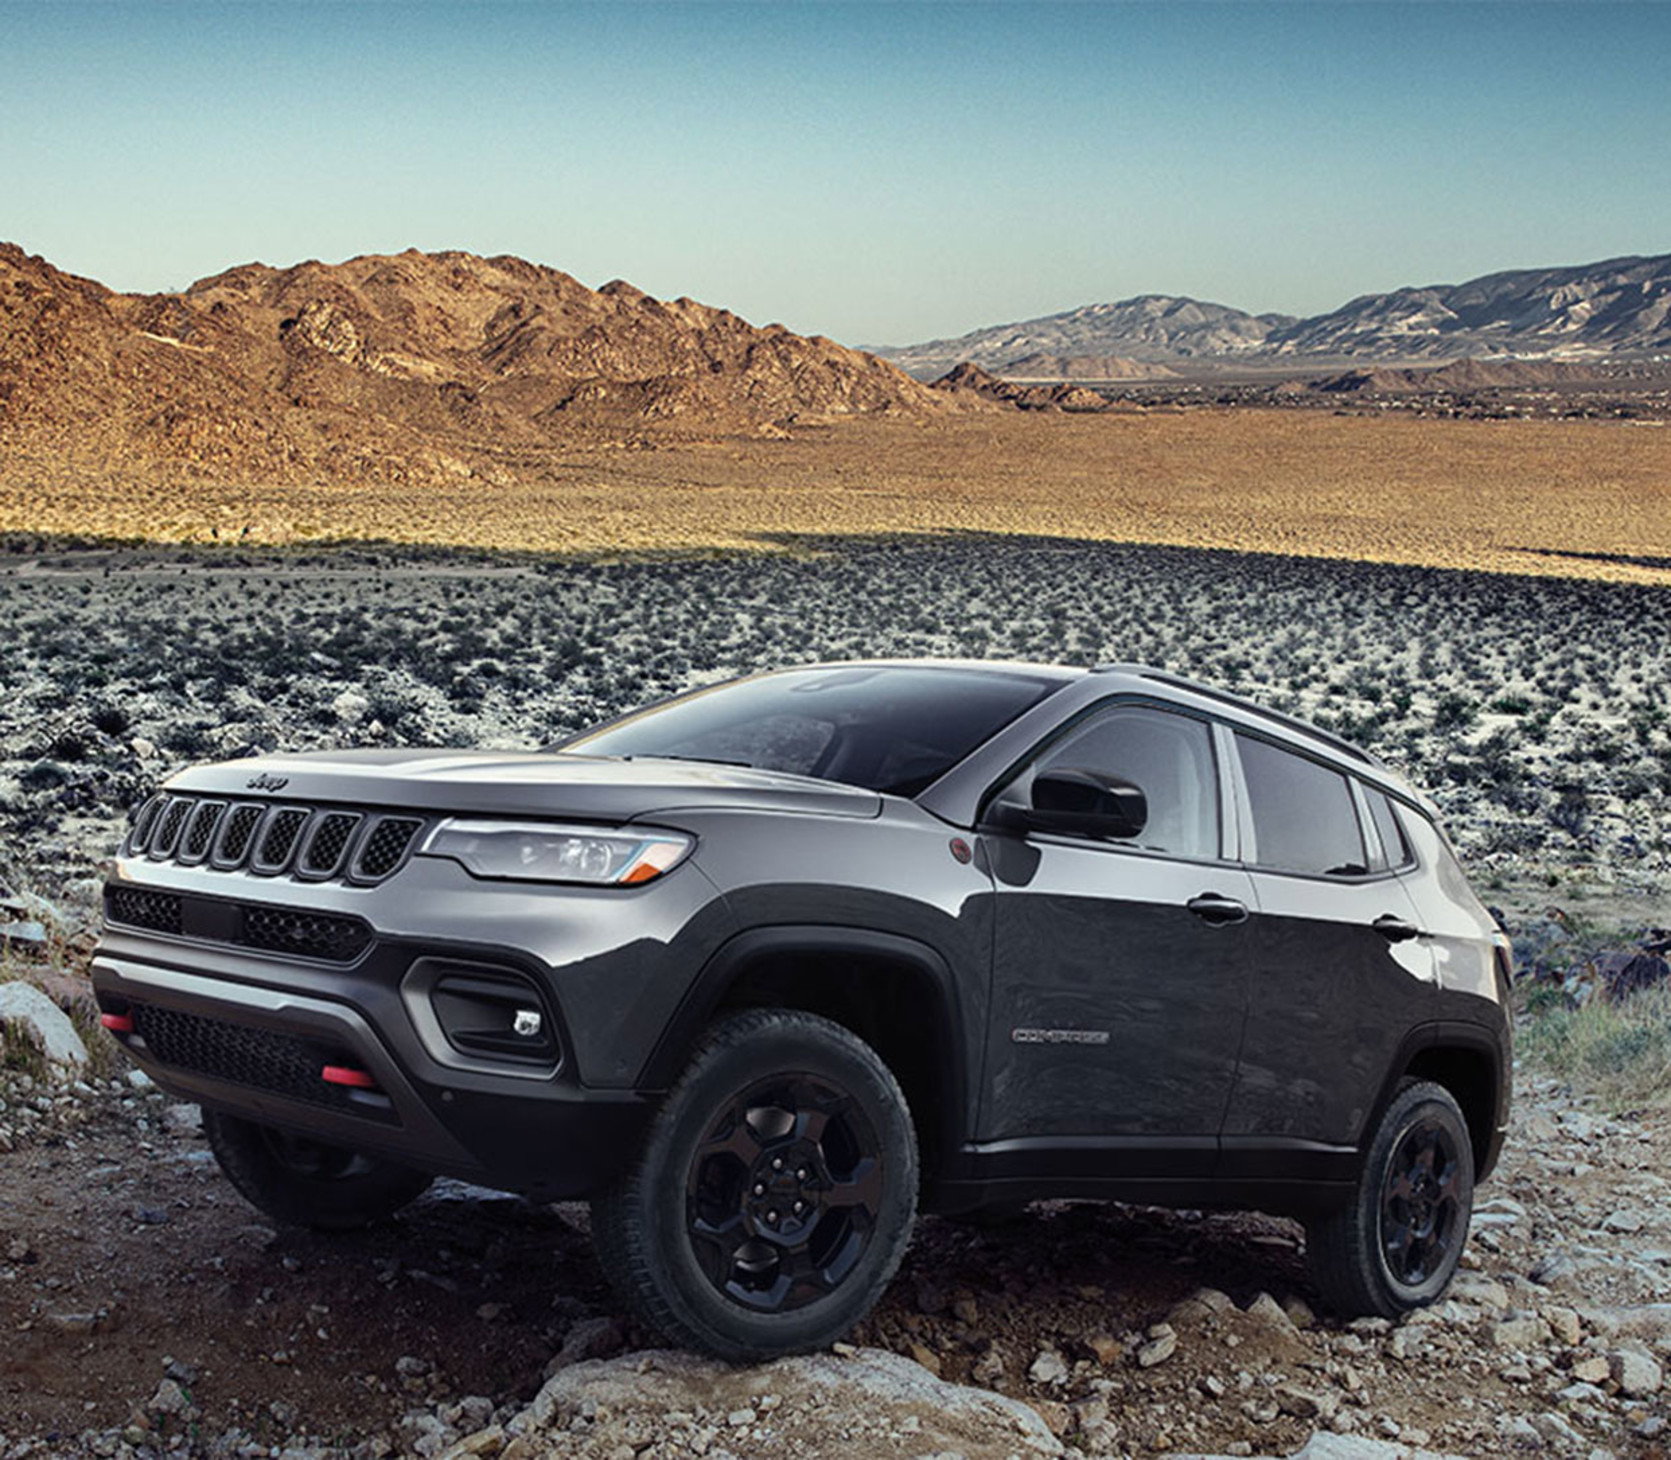 2023 Compass in dark grey parked on a gravel path with mountains in the background.